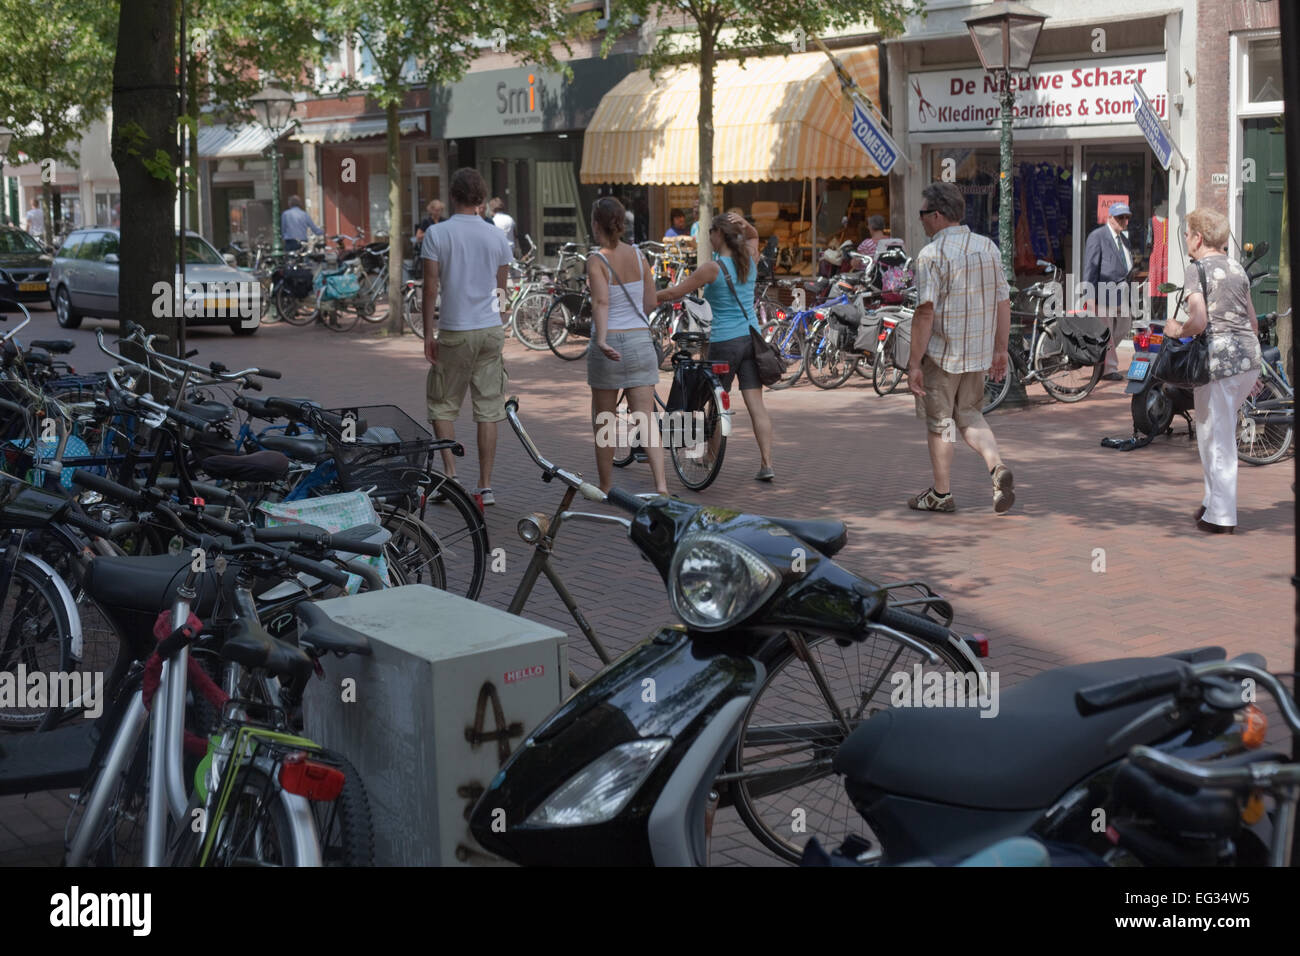 Leiden. Dutch Province of South Holland, The Netherlands. High street shopping area. Note bicycle parking, no need secucurity. Stock Photo